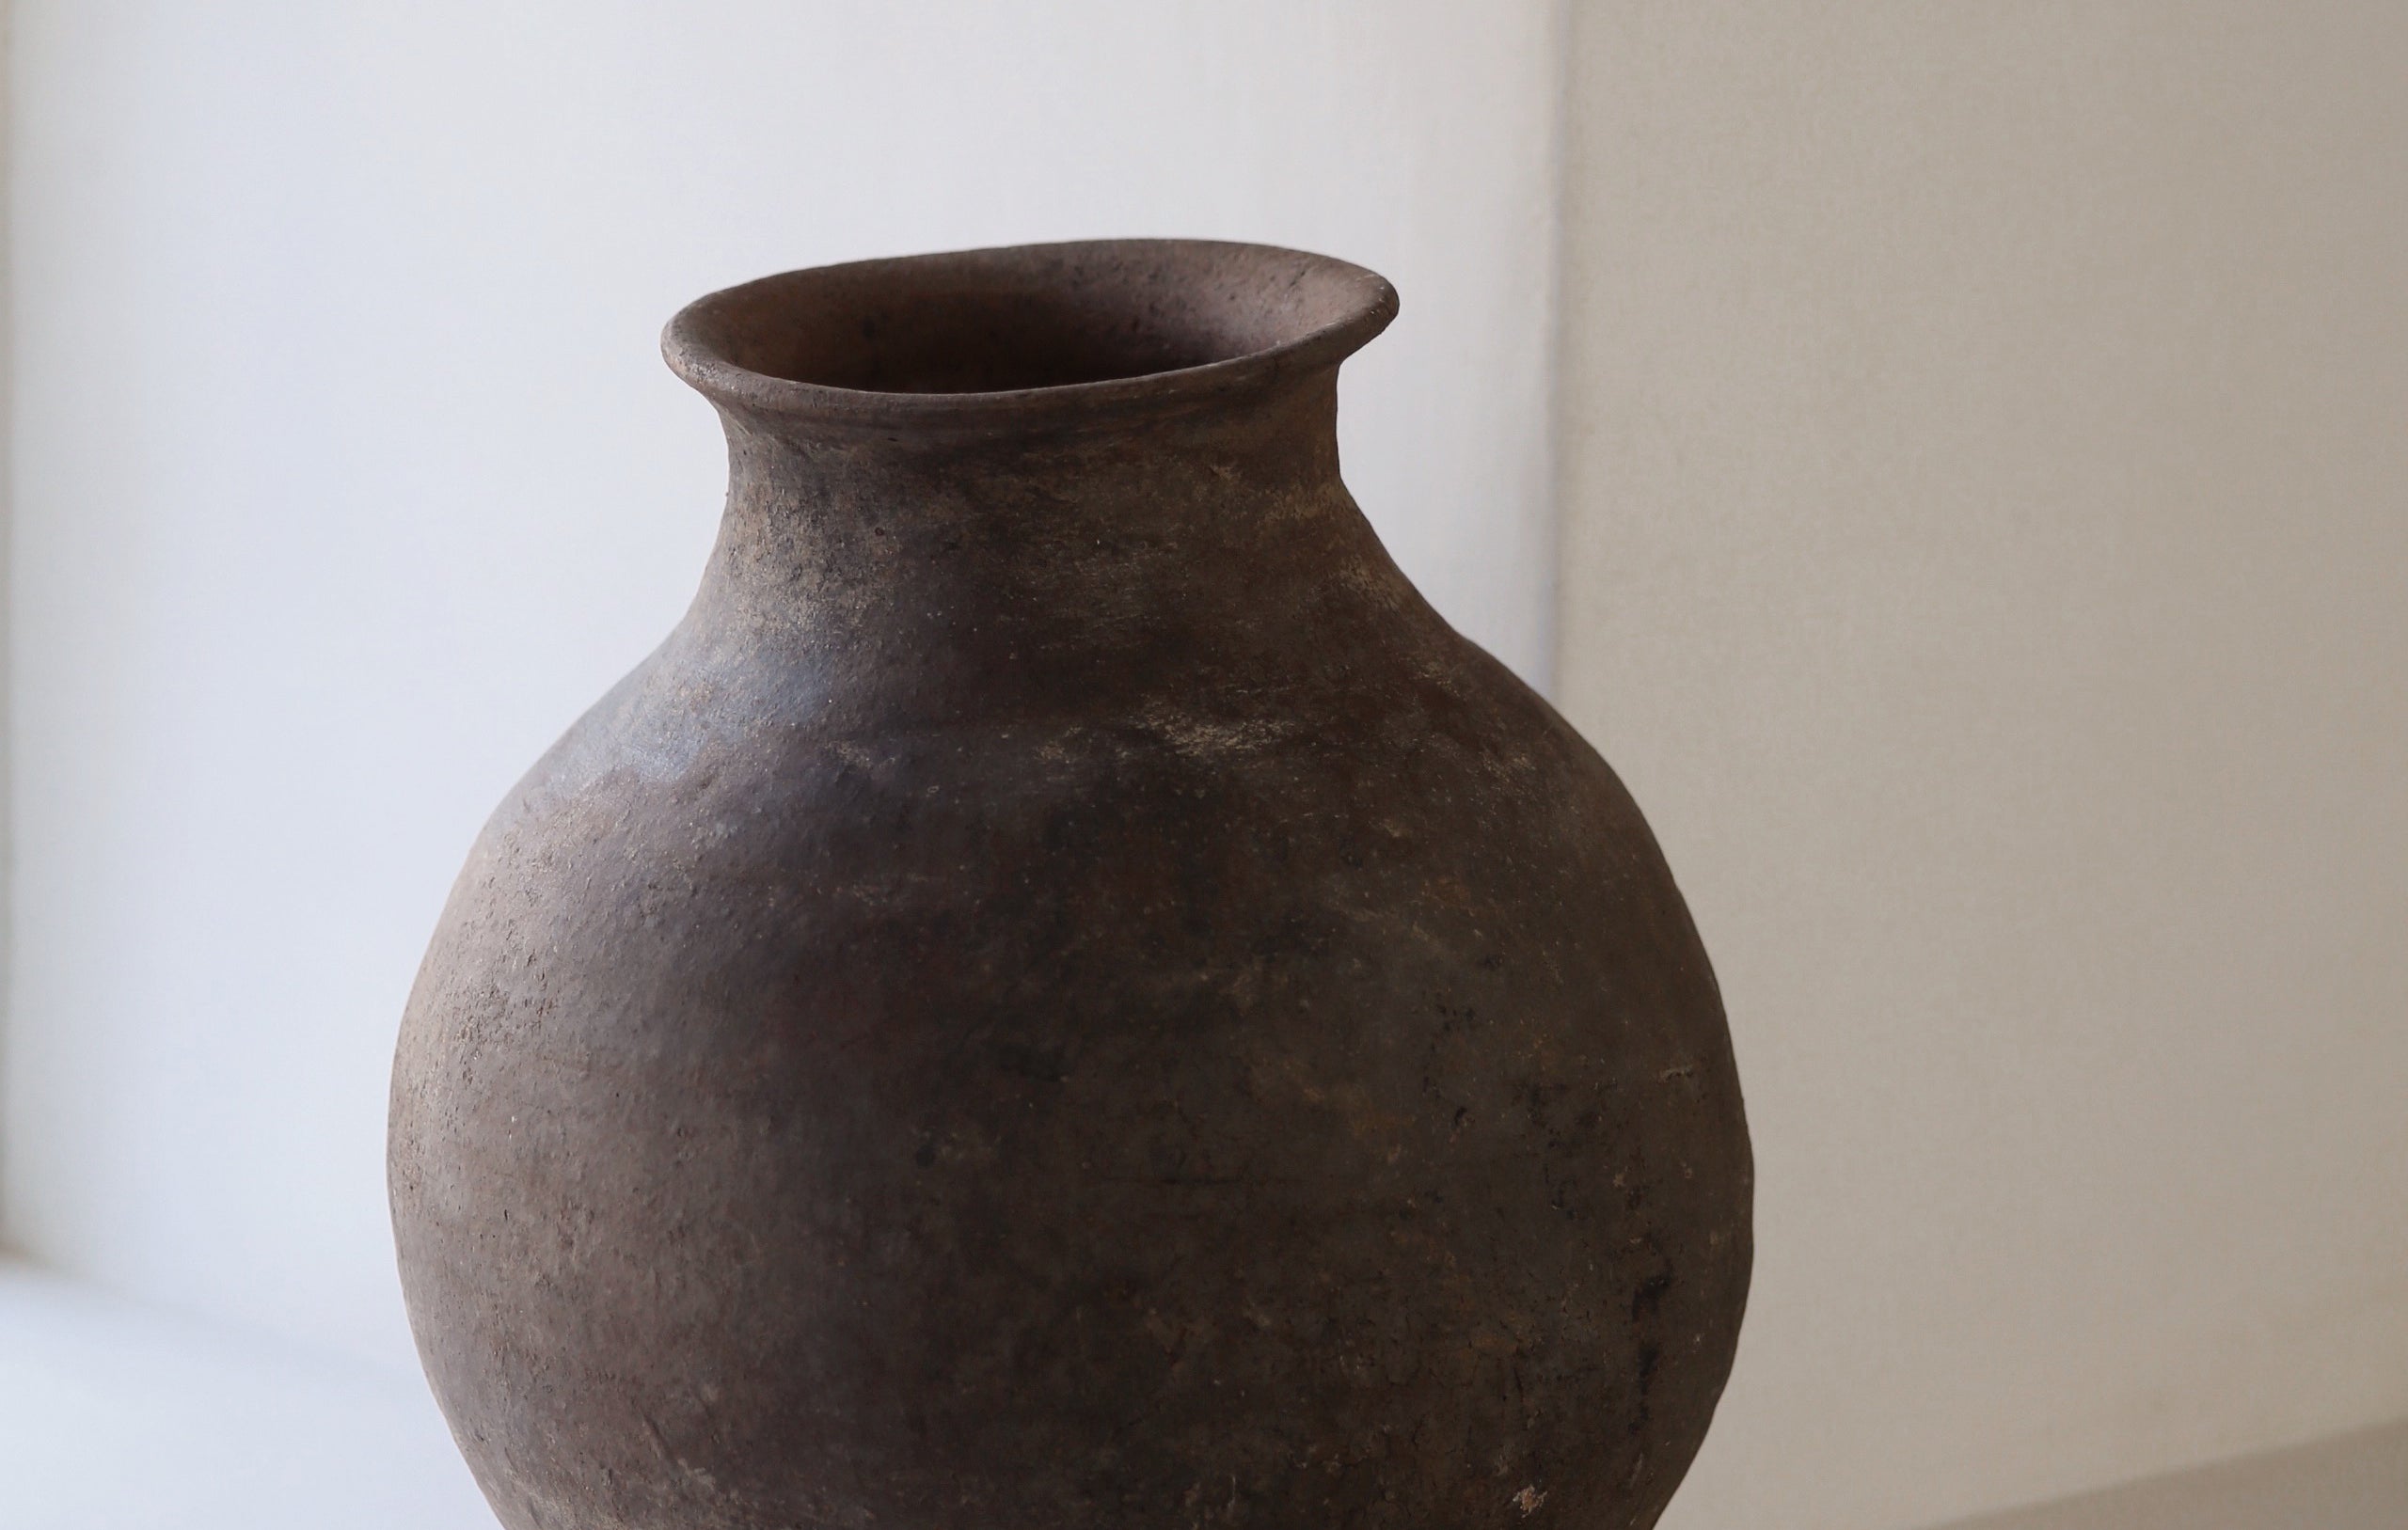 Dark clay pot with rustic aged patina styled in neutral interior